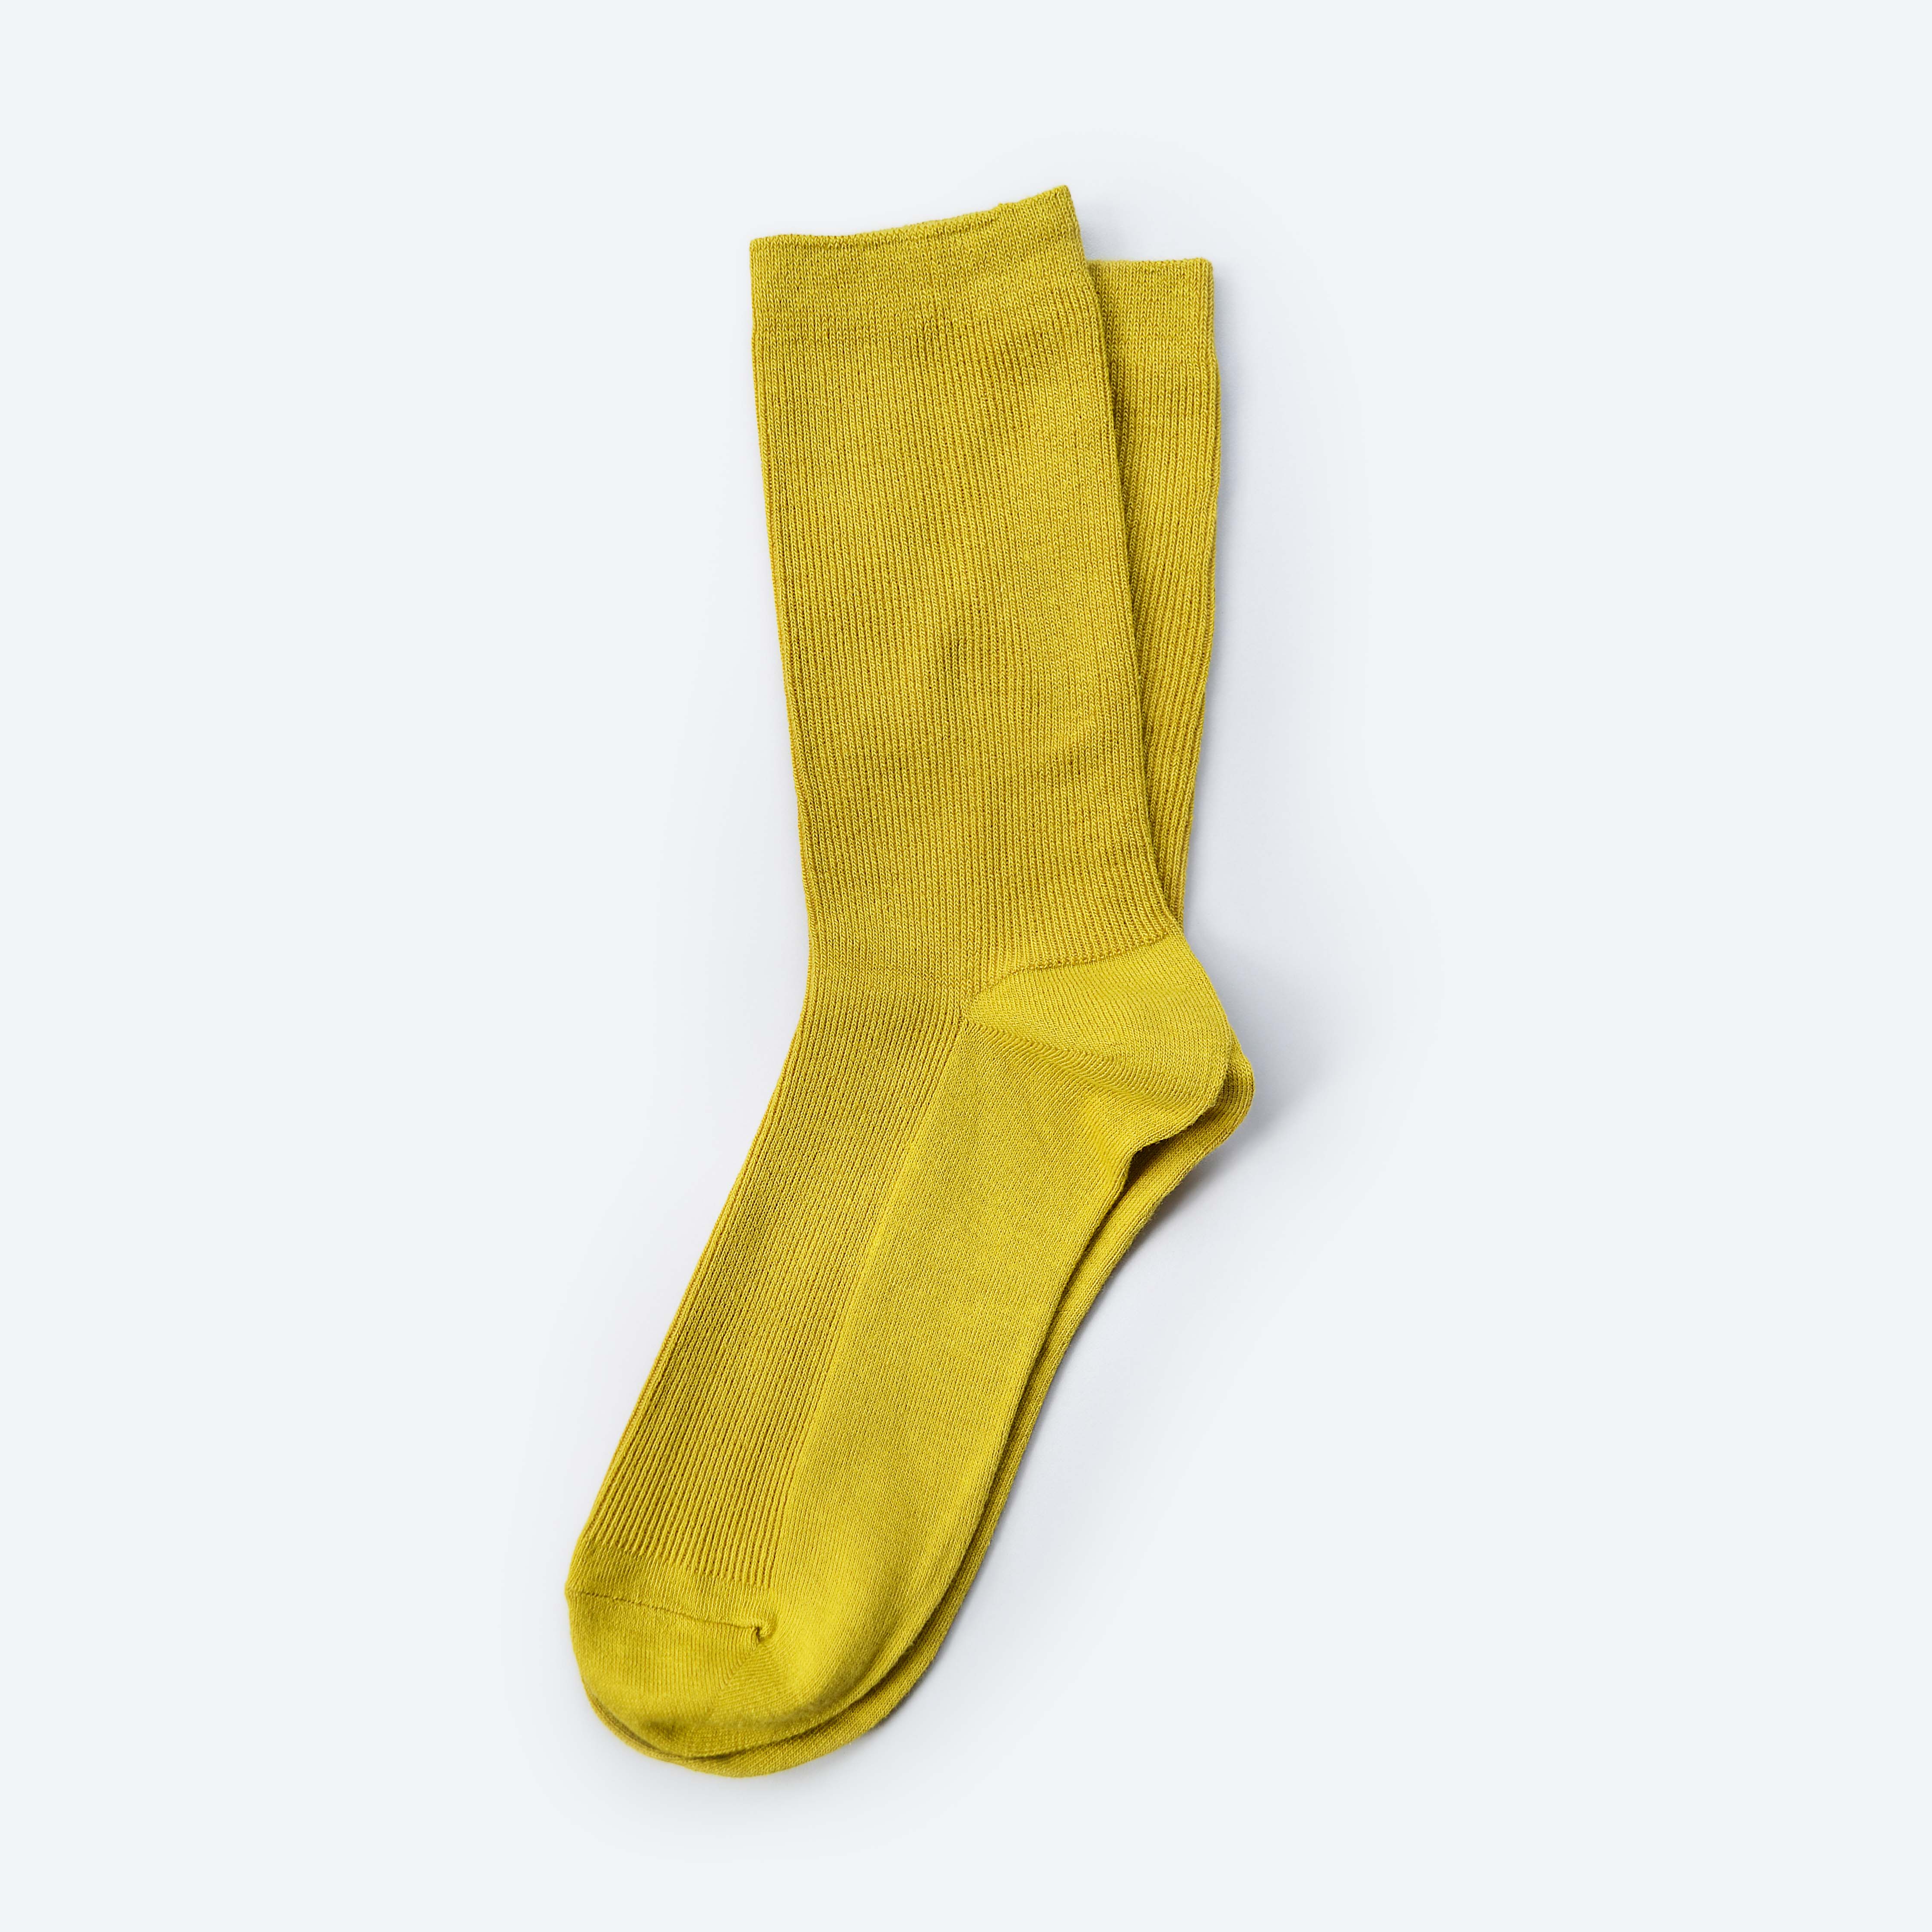 Hooray Sock Co.&#39;s Munsell Crew Socks: Vibrant style in bright Green Yellow. Shorter crew length. 80% cotton, 20% spandex. Made in South Korea. Small (Women&#39;s 4-10).